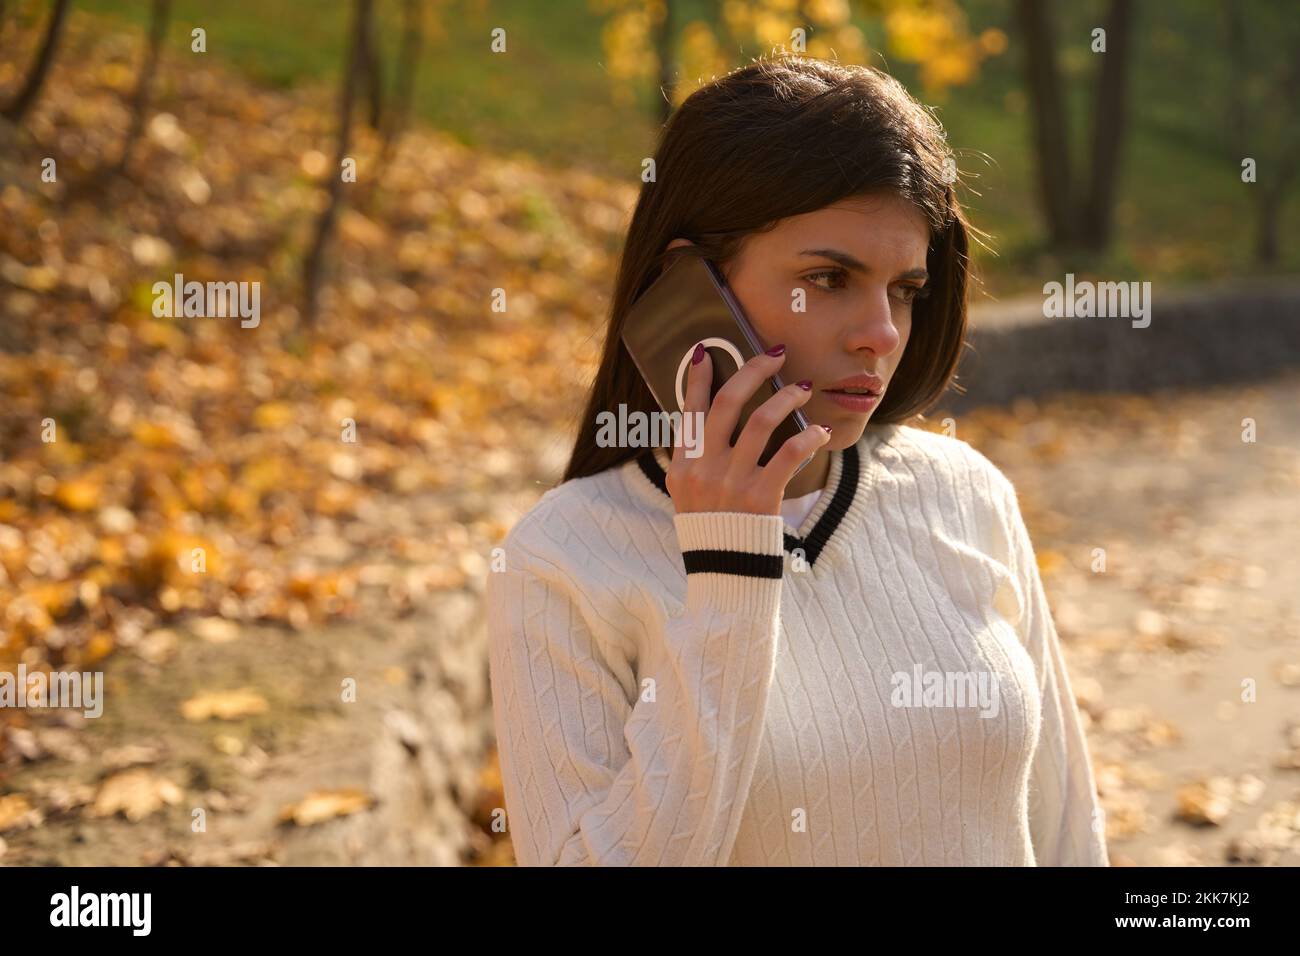 Sad young woman holding a phone near her ear Stock Photo